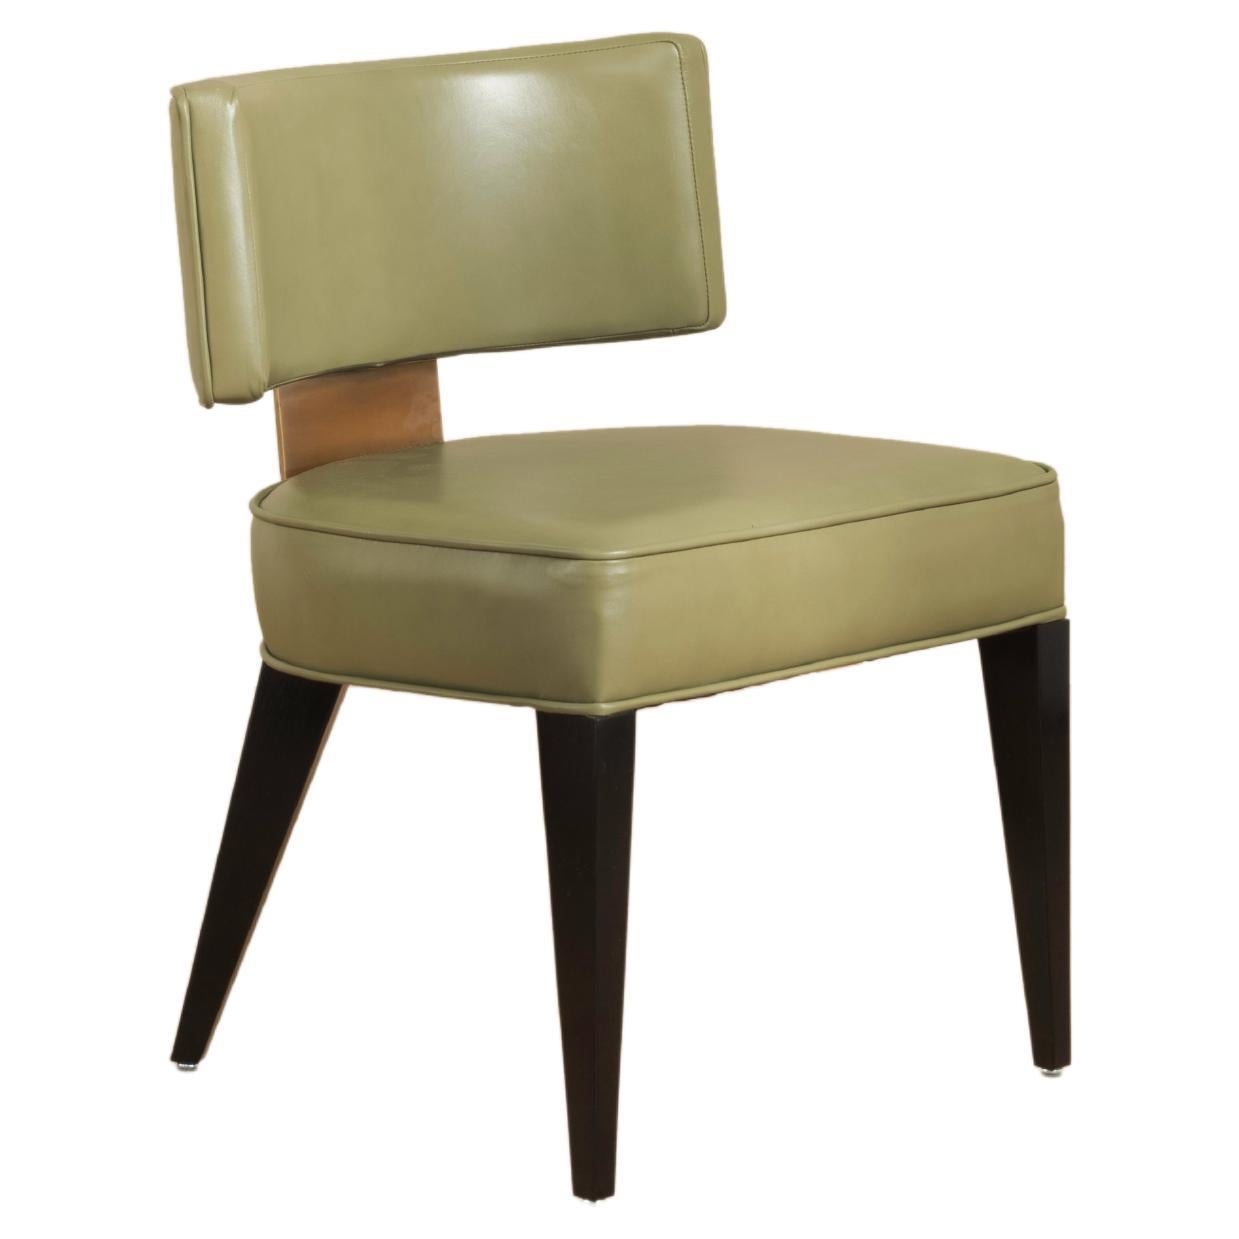 Rupert Bevan Lafon Dining Chair (in Customer's Own choice of Material/Leather) For Sale